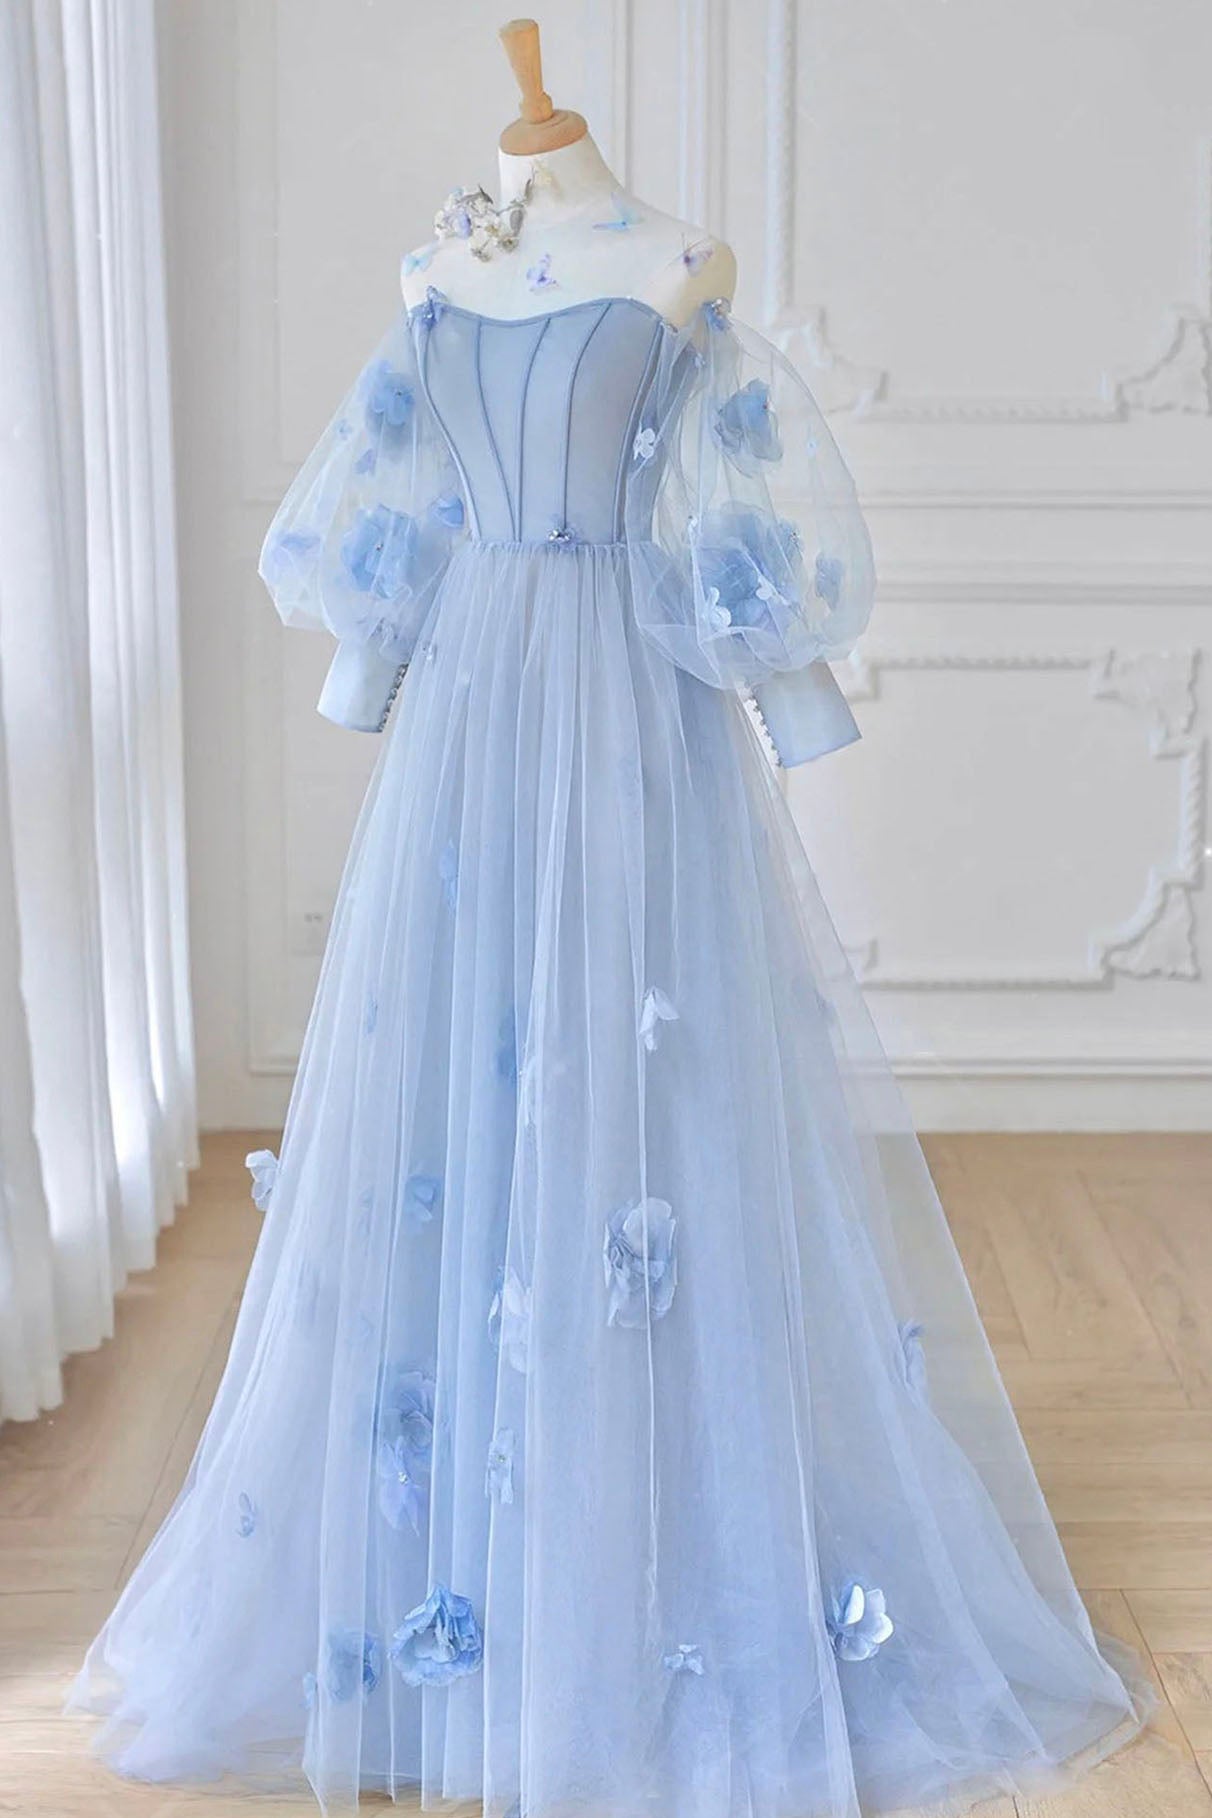 Blue Tulle Flowers Long Prom Dress, Lovely A-Line Puff Sleeve Evening Dress